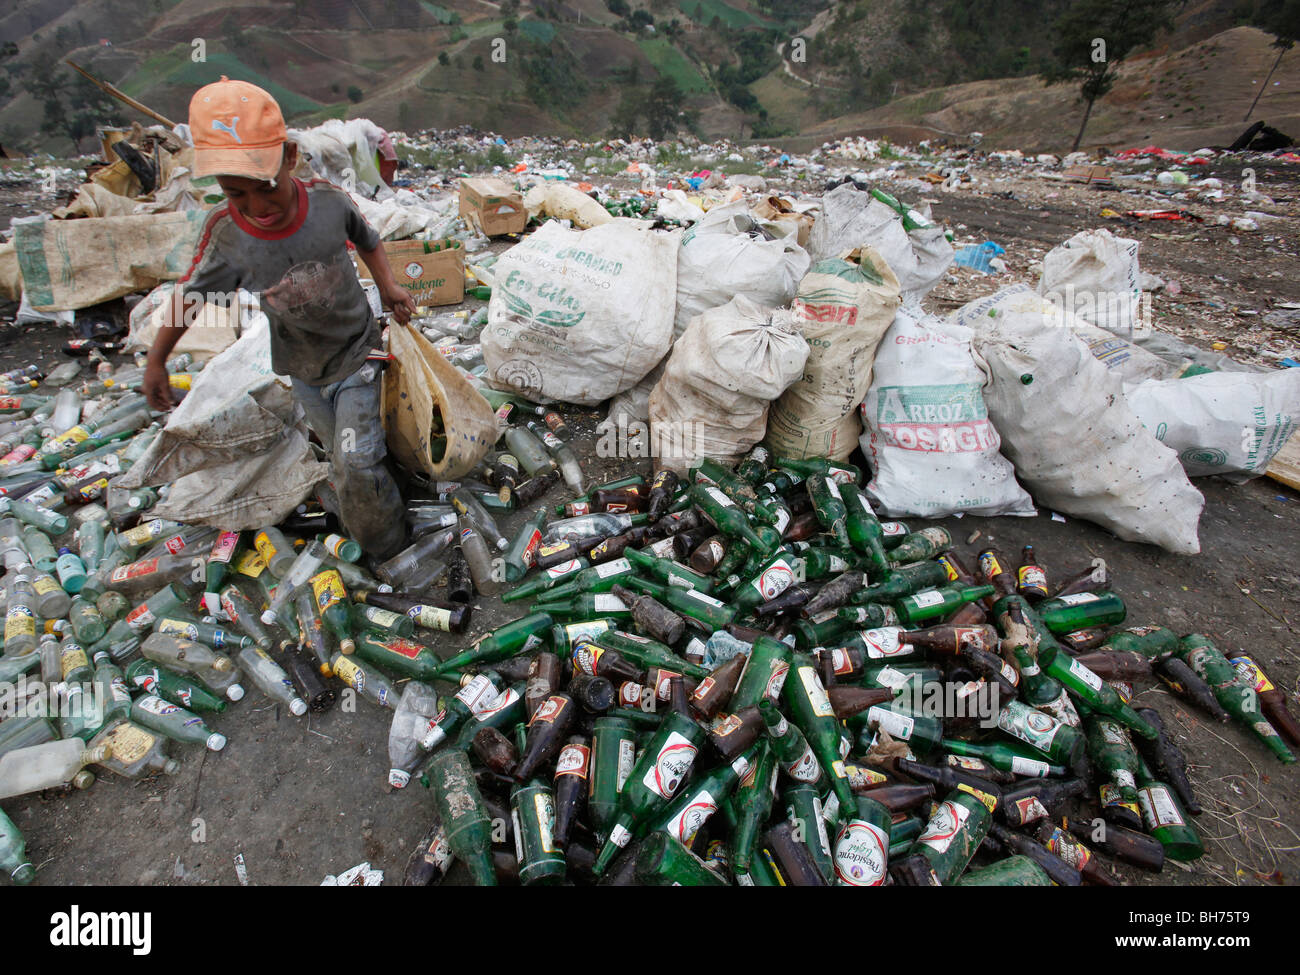 A boy scavenges bottles at a trash disposal area outside of Constanza, Dominican Republic Stock Photo